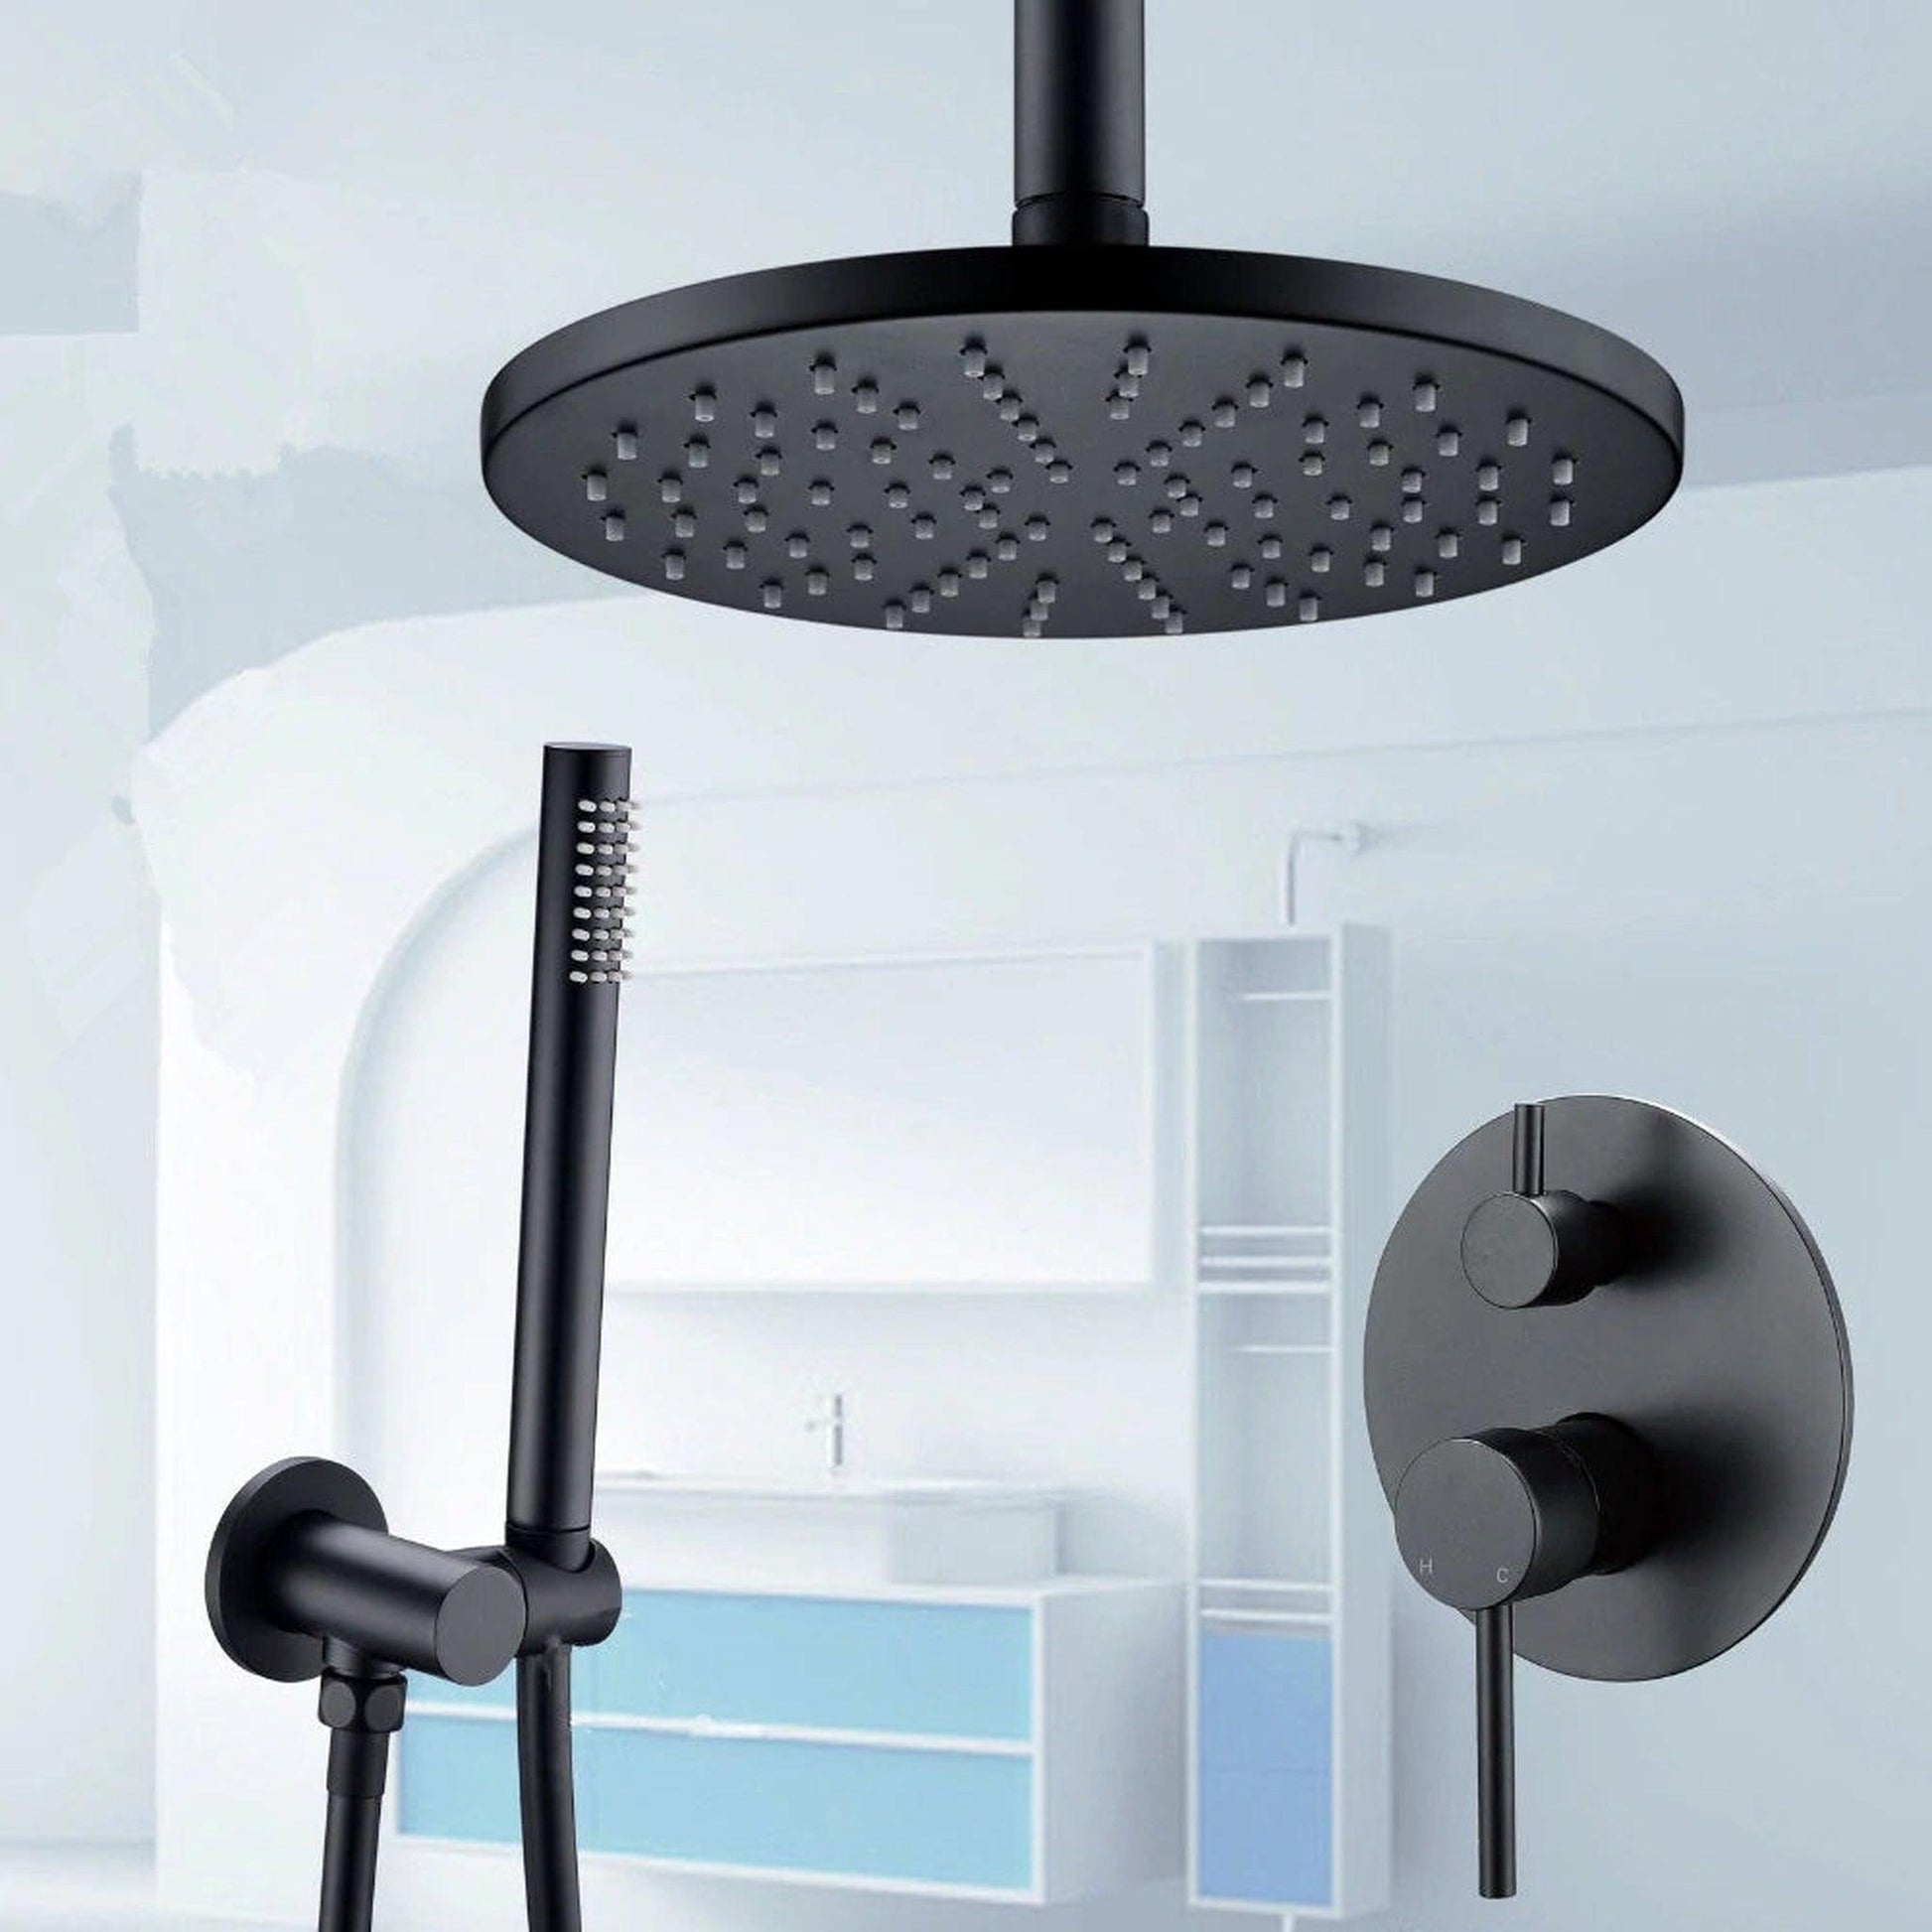 FontanaShowers Verona Creative Luxury 16" Dark Oil Rubbed Bronze Round Ceiling Mounted Shower Head Hot and Cold Mixer Rainfall Shower System With Hand Shower